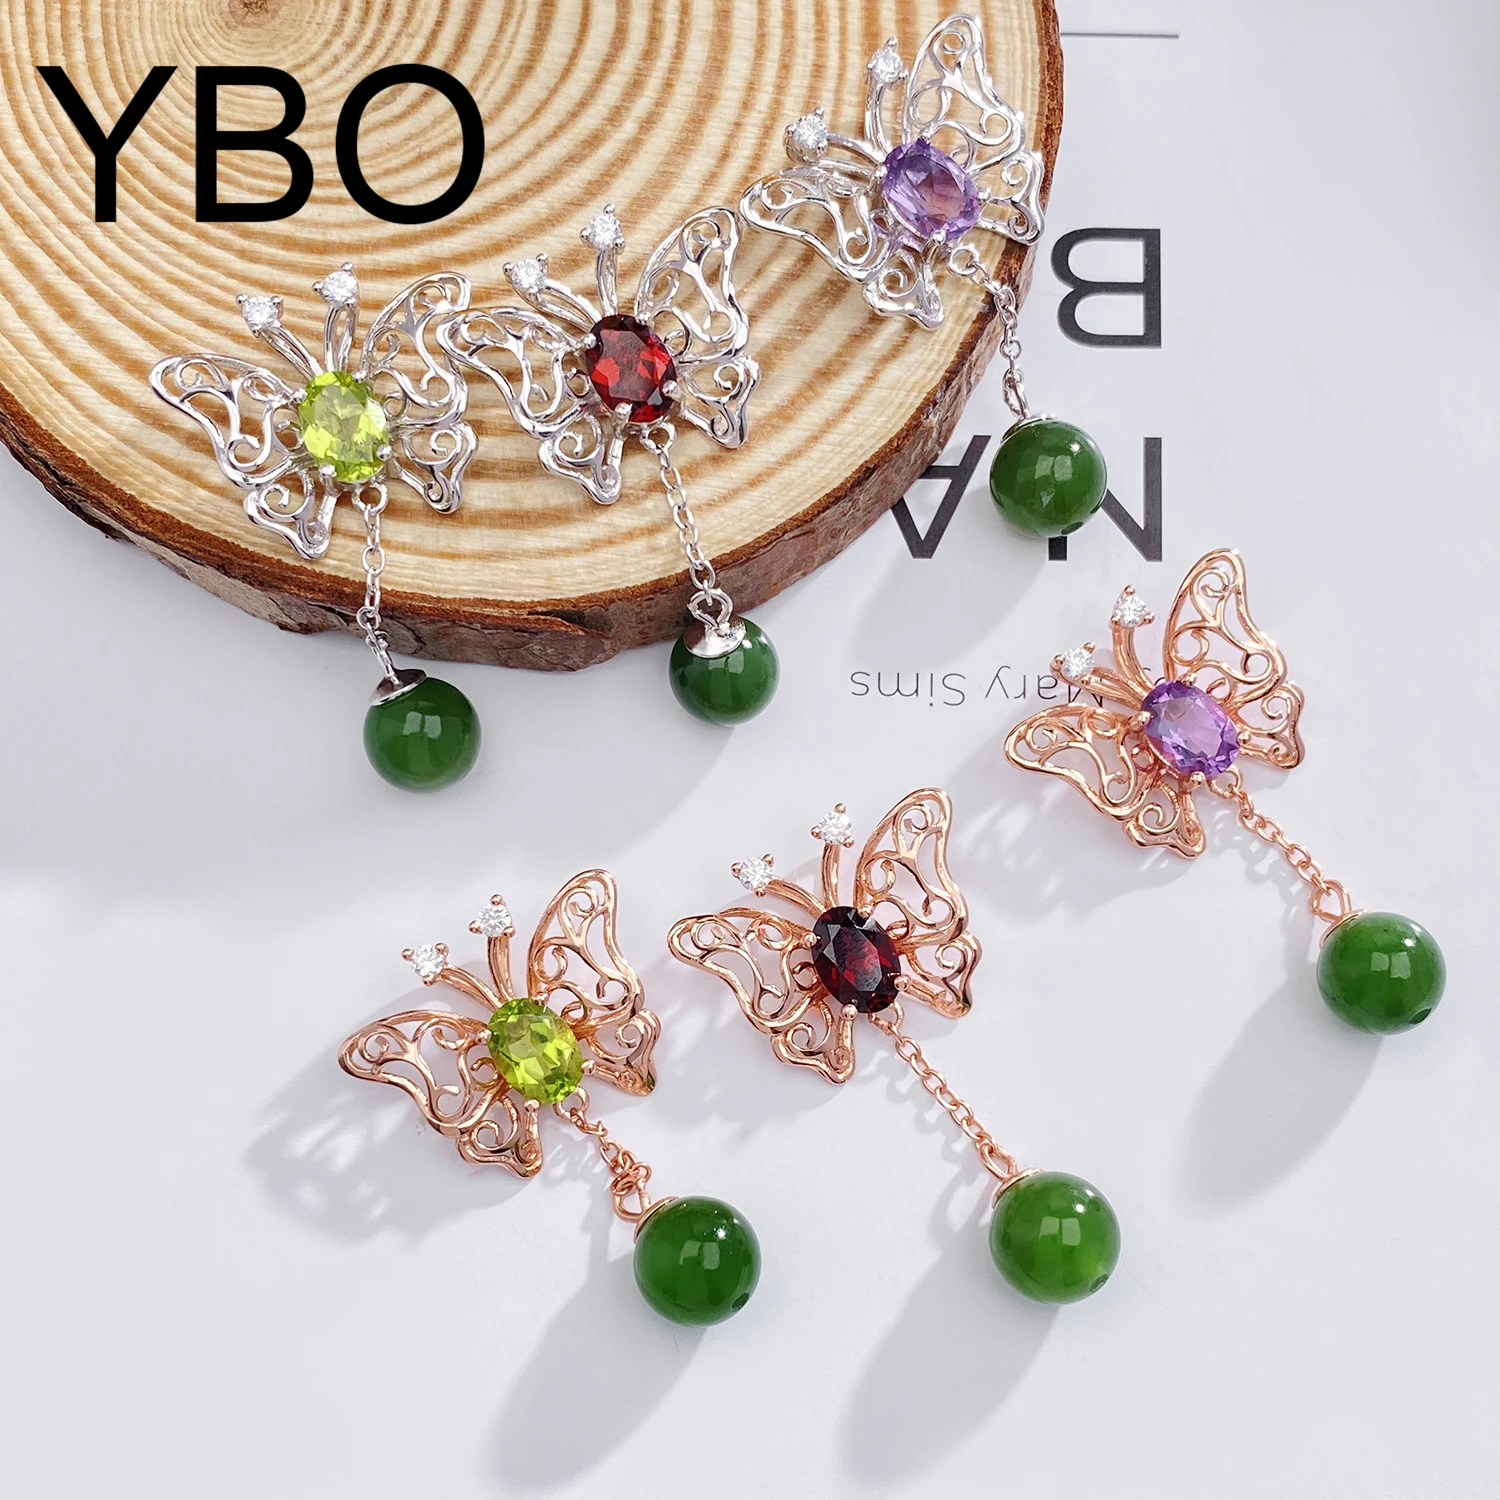 

YBO Hollow Out Butterfly Pendants Natural Gemstone Amethyst Peridot Garnet Jasper Necklaces 925 Sterling Silver Clavicle Chains